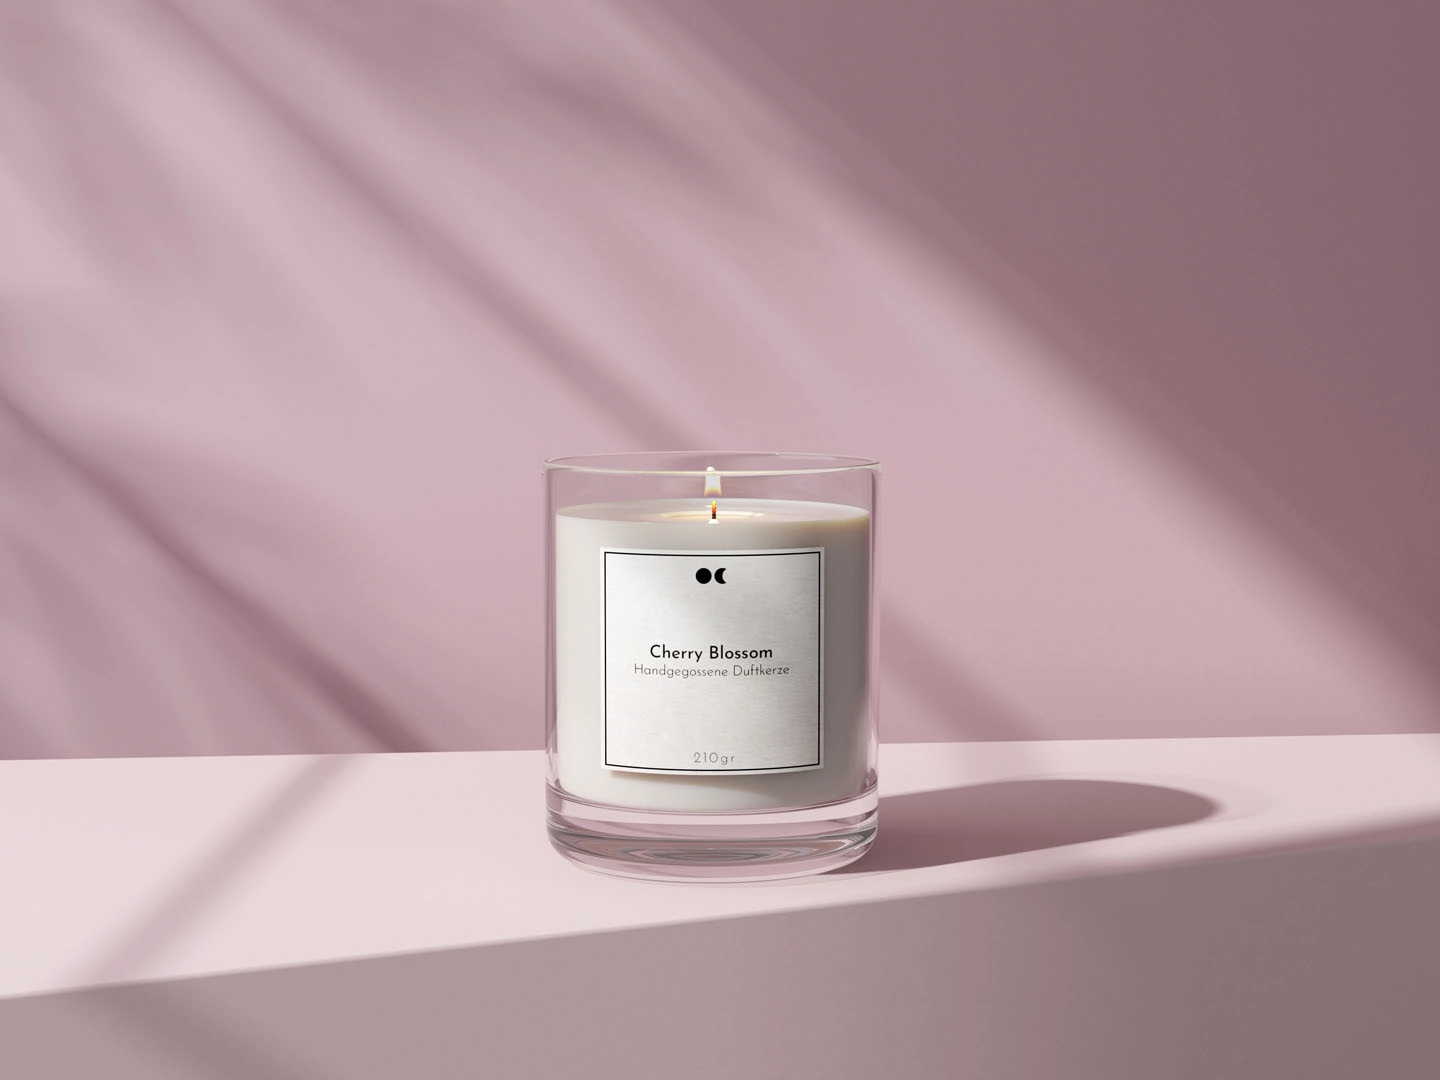 Scented candle – Cherry Blossom